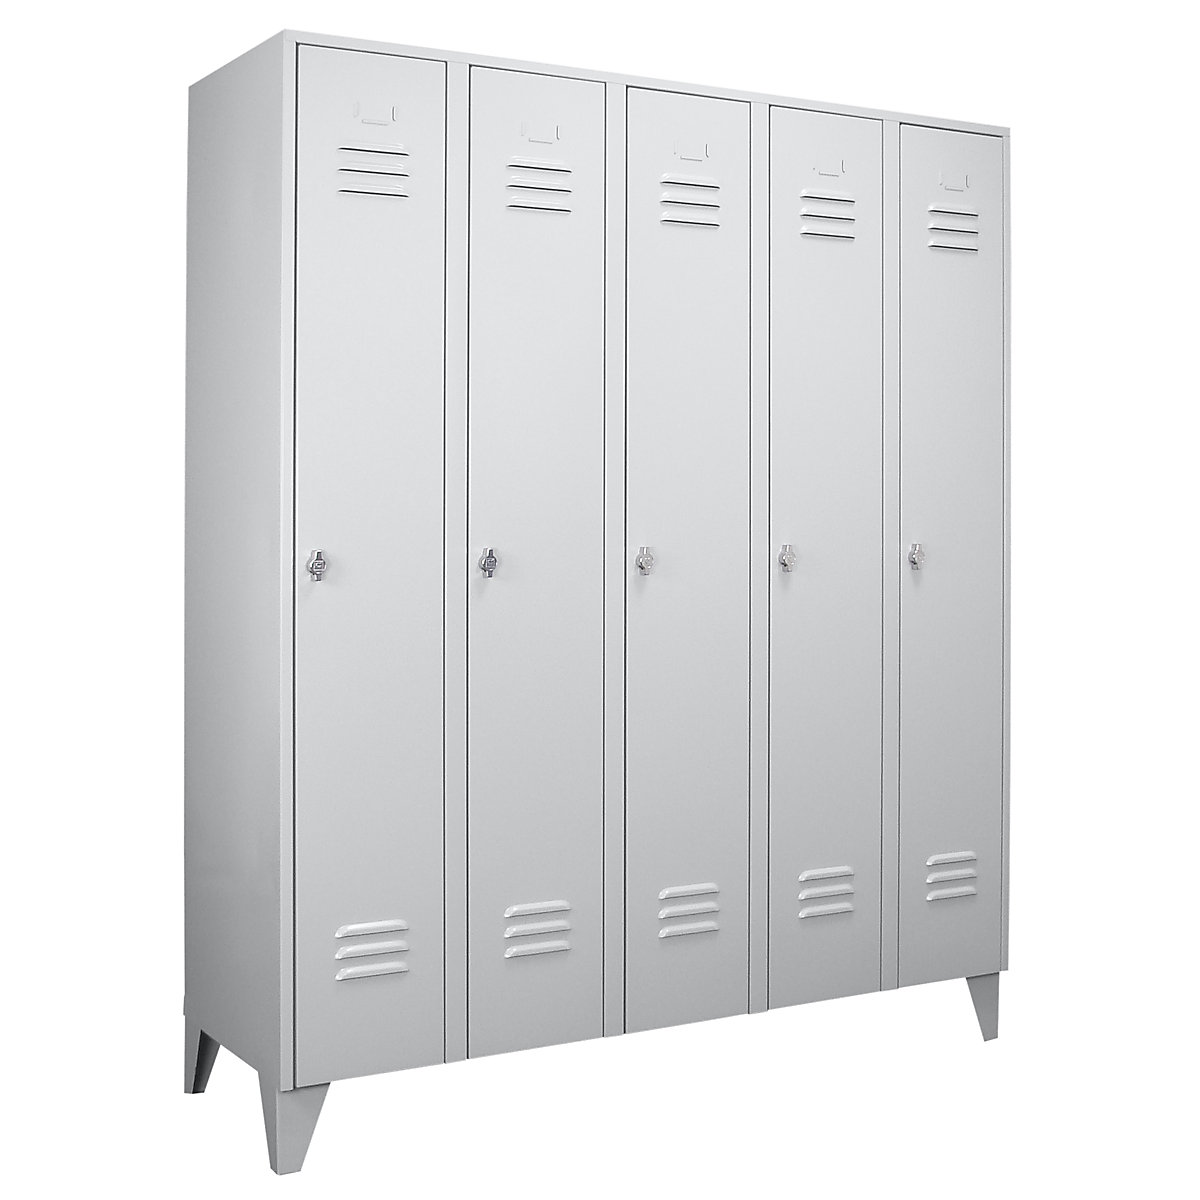 Steel locker with stud feet – Wolf, full height compartments, solid doors, compartment width 300 mm, 5 compartments, light grey-39